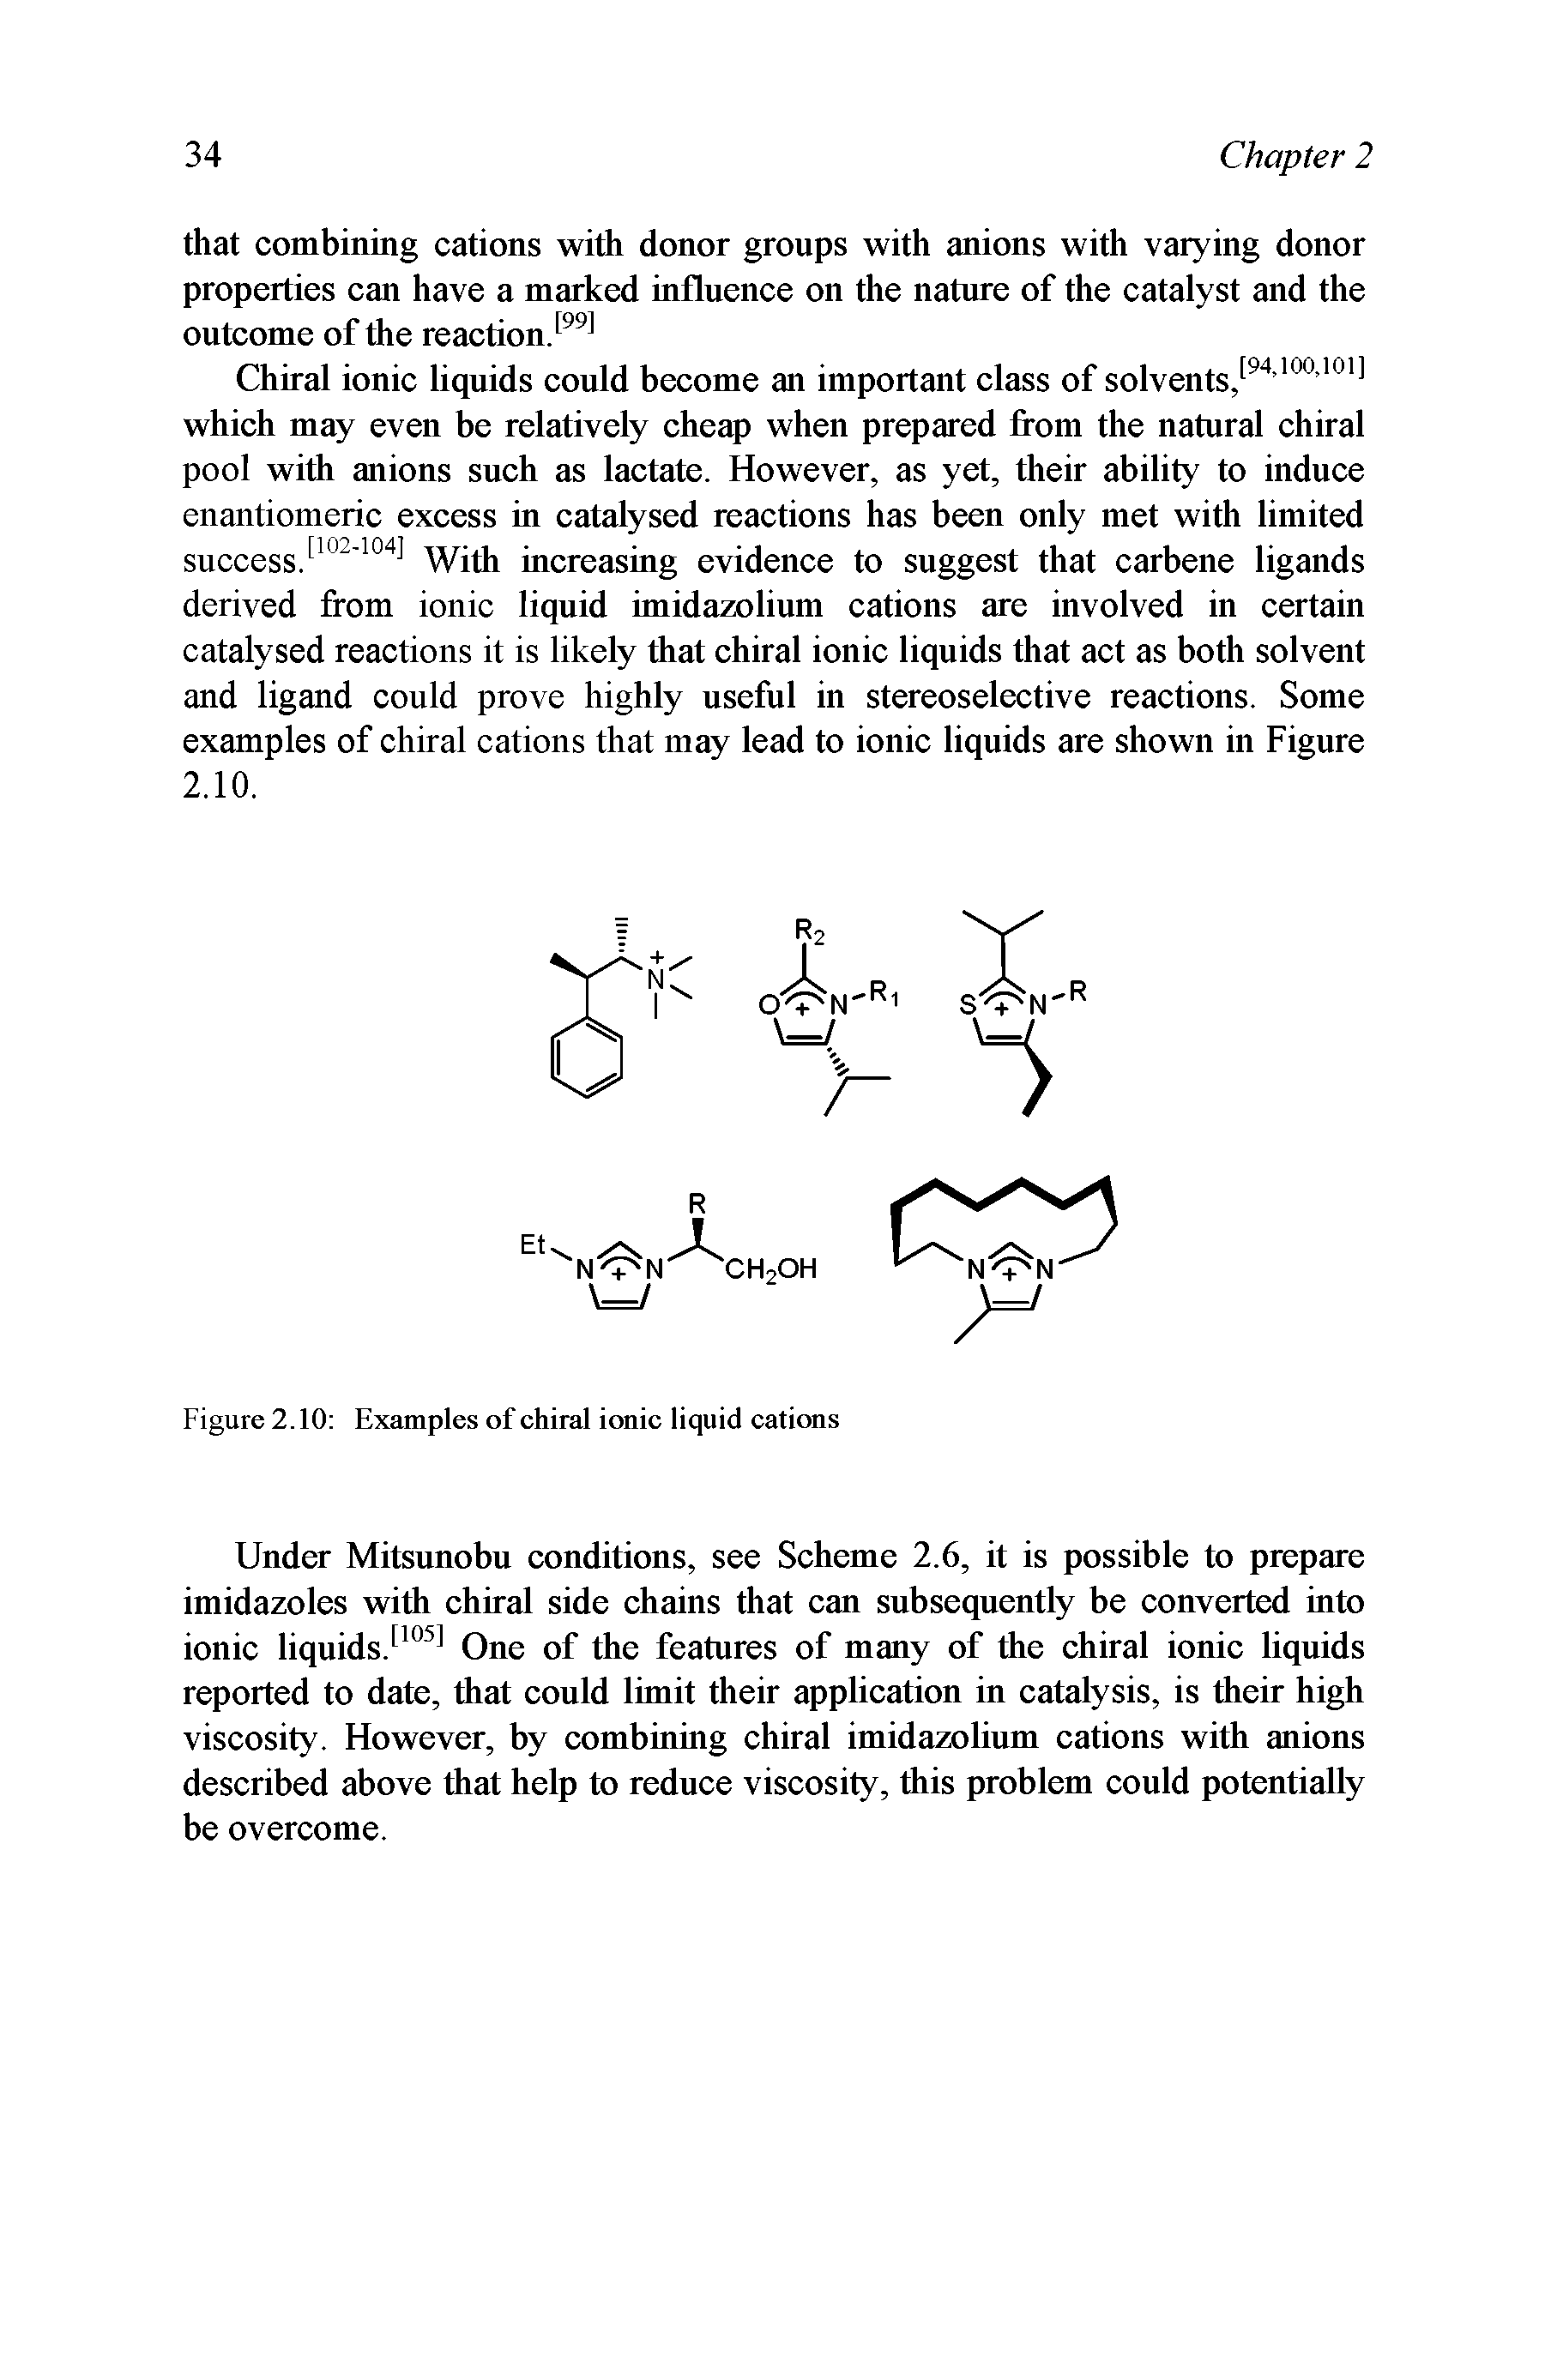 Figure 2.10 Examples of chiral ionic liquid cations...